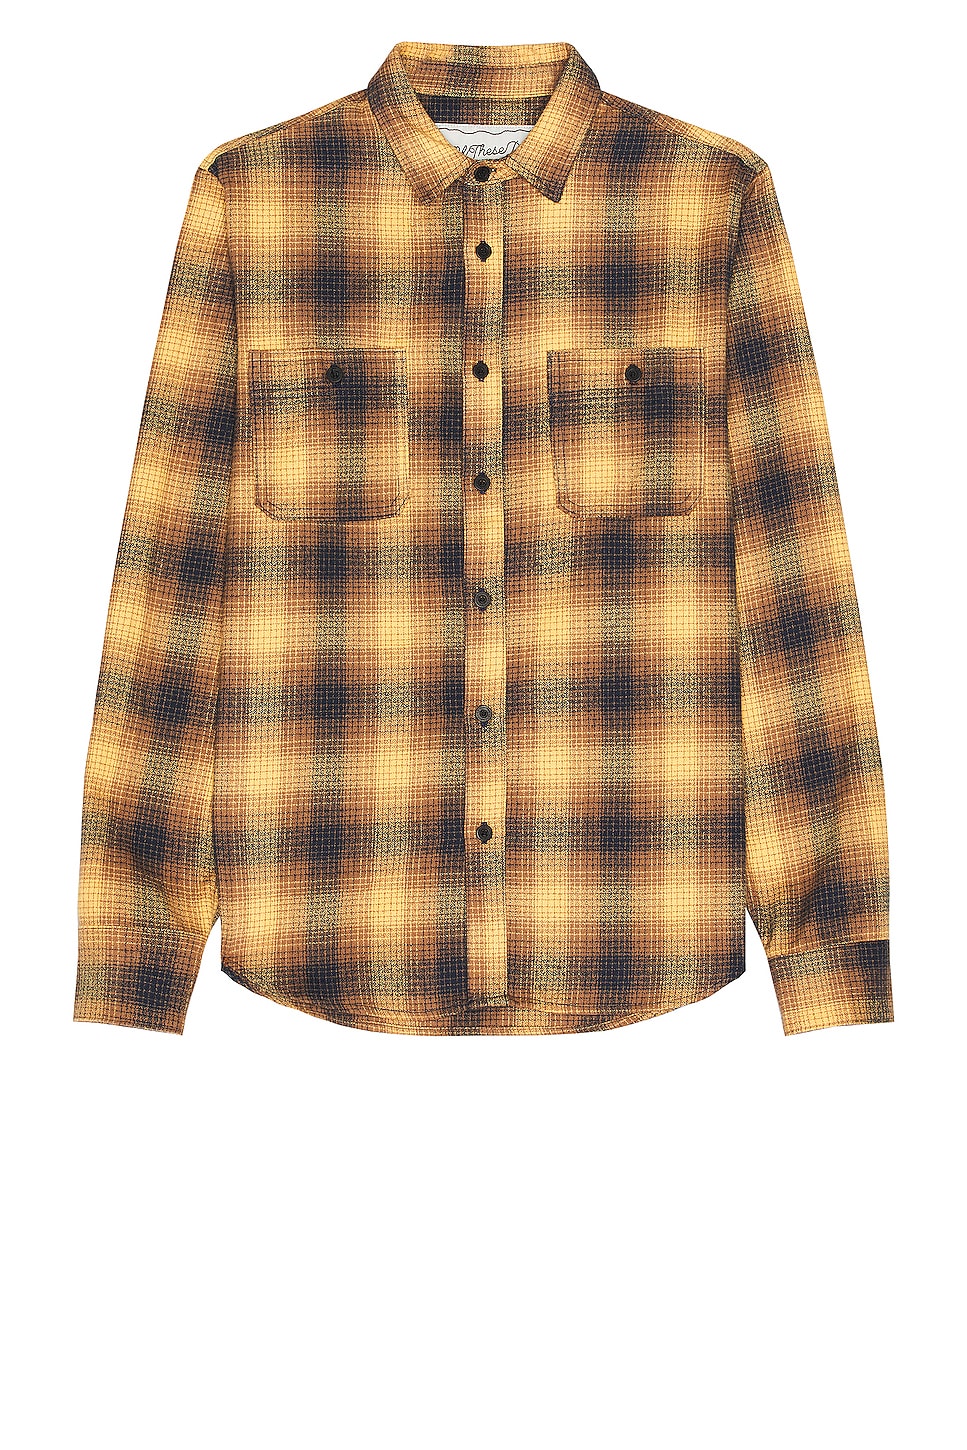 San Marcos Flannel Shirt in Yellow